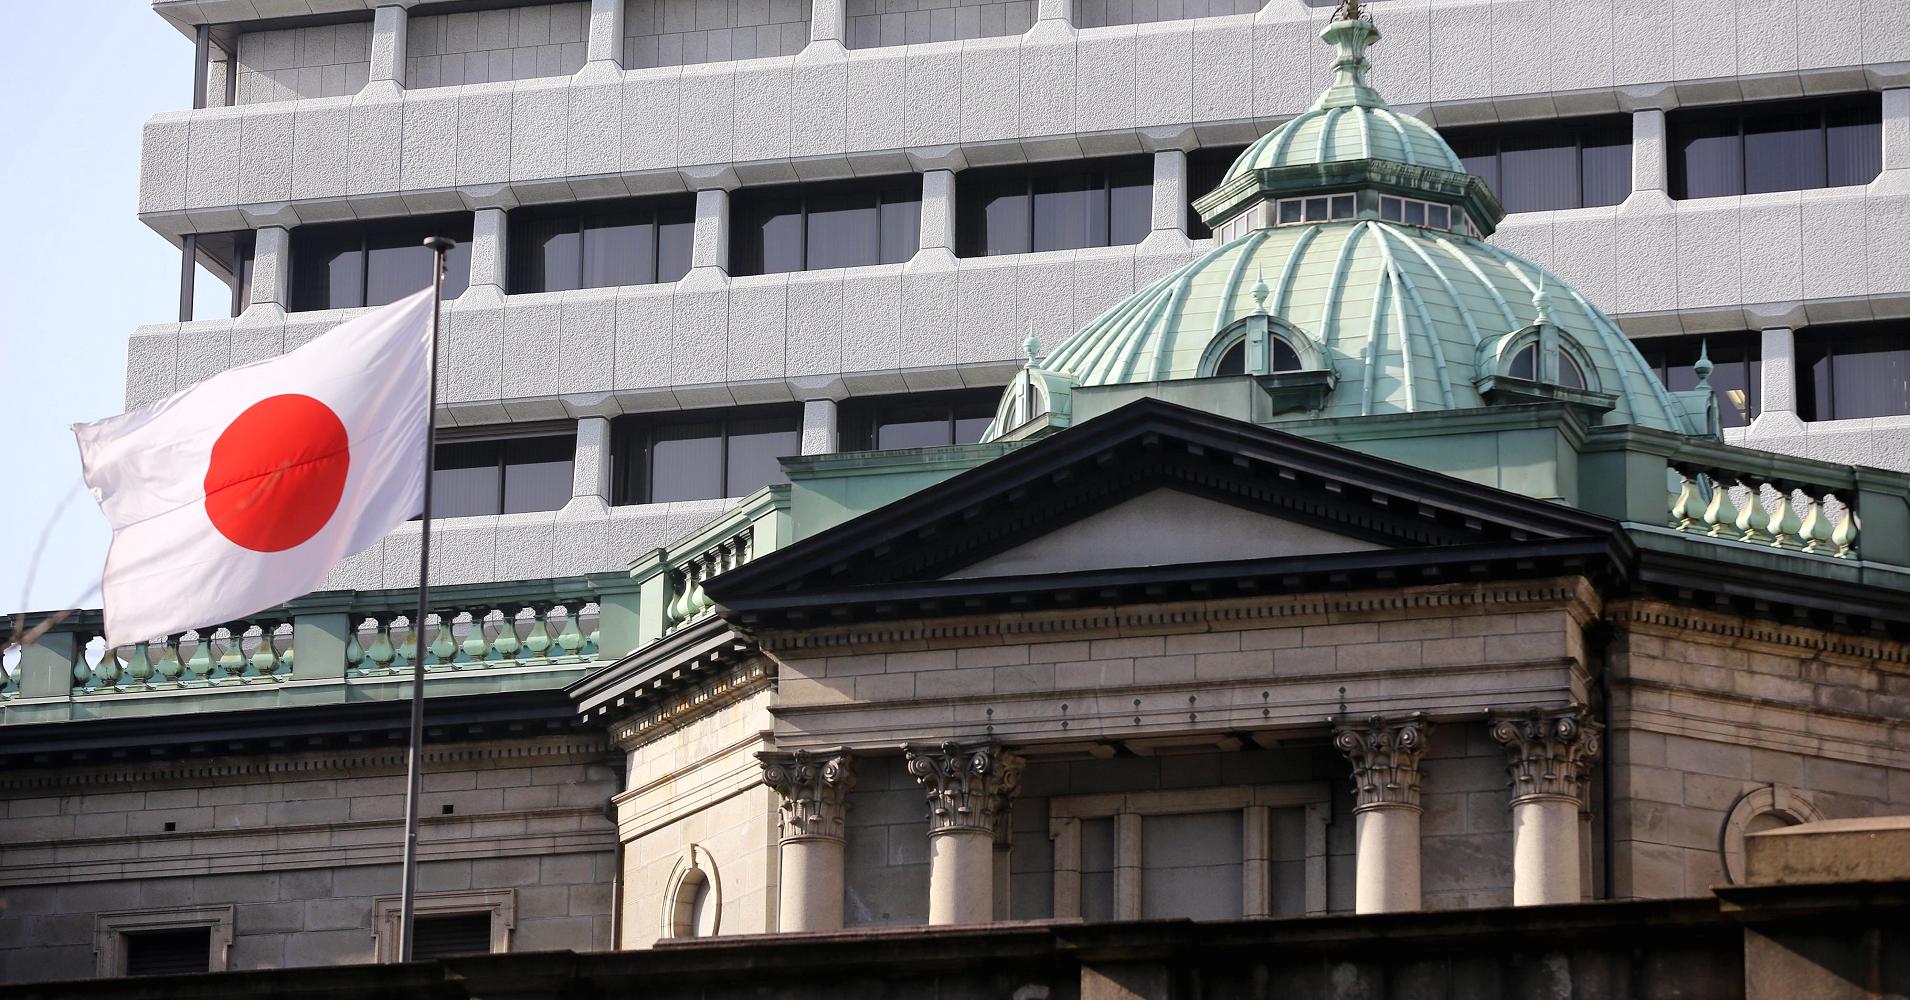 BOJ likely to cut inflation forecasts, wary of easing: sources